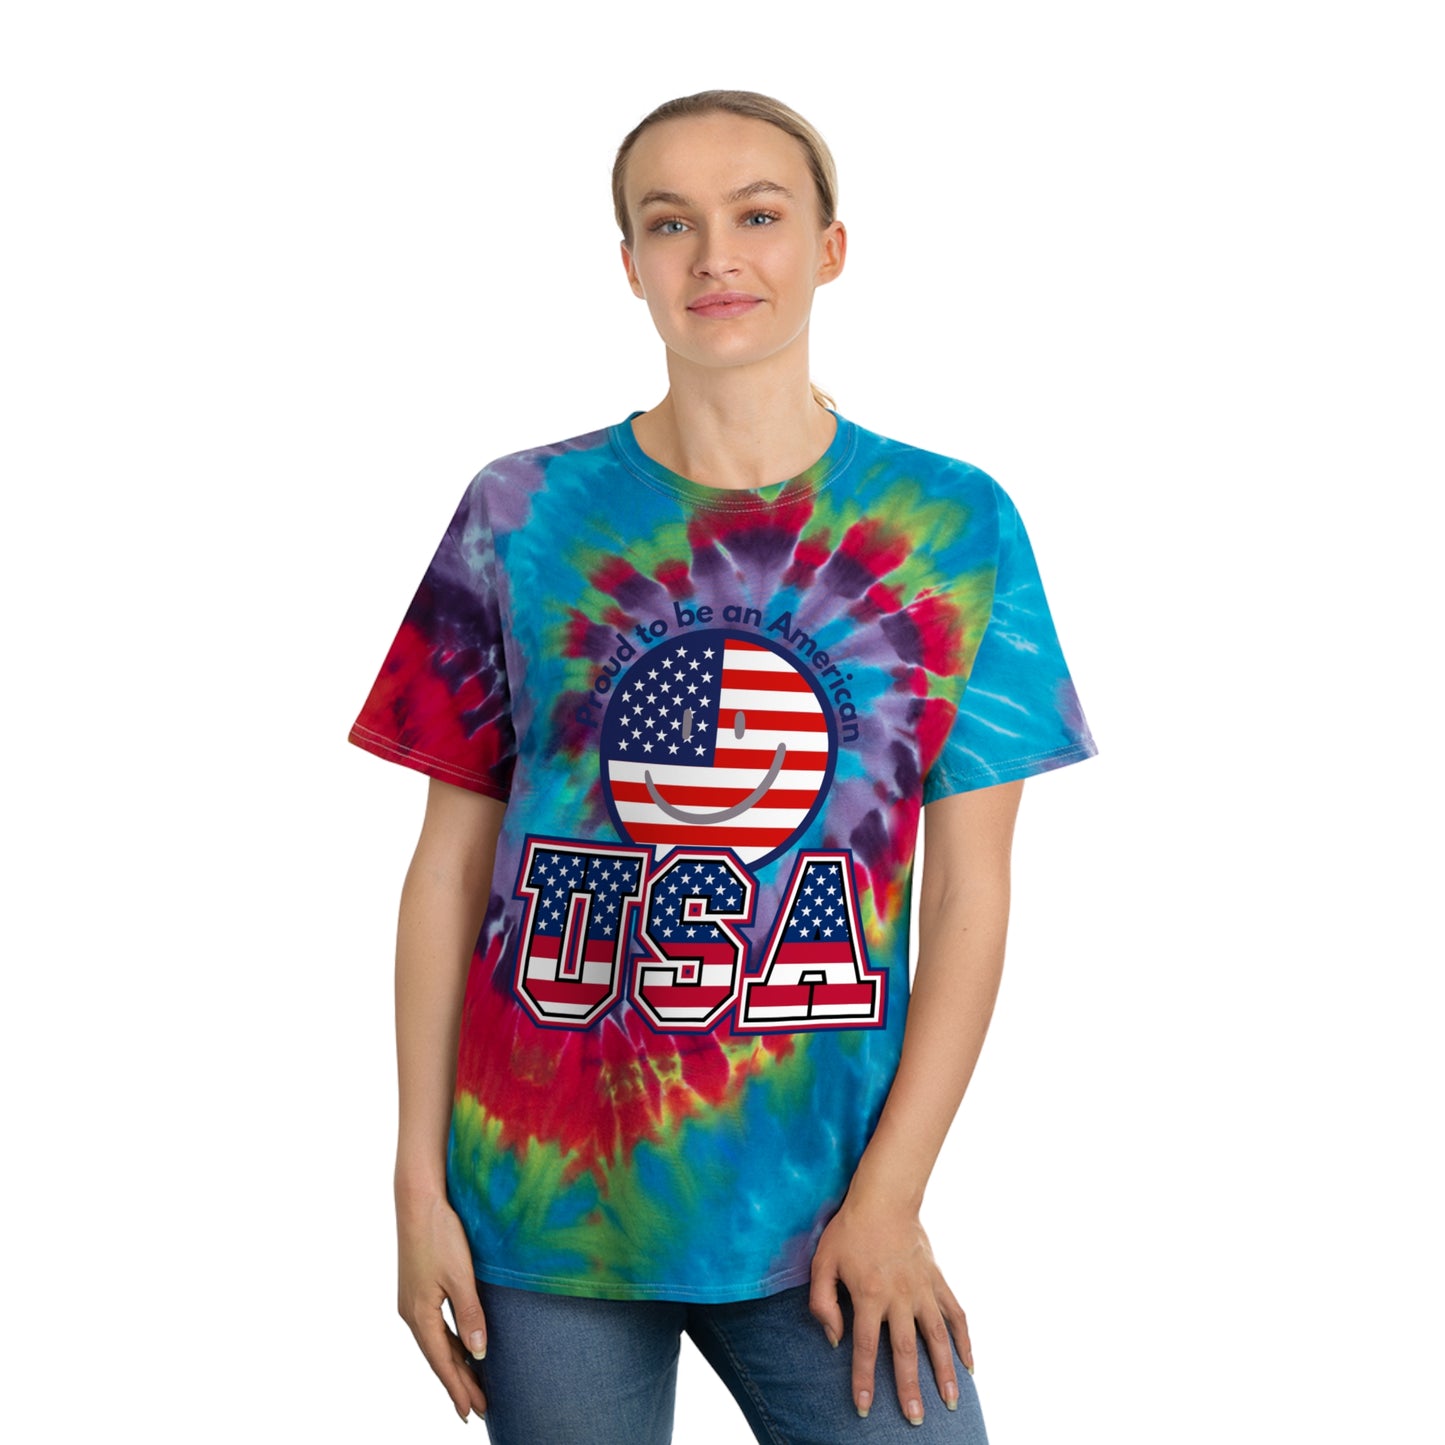 USA Flag Tie-Dye T-Shirt (Proud To Be An American)